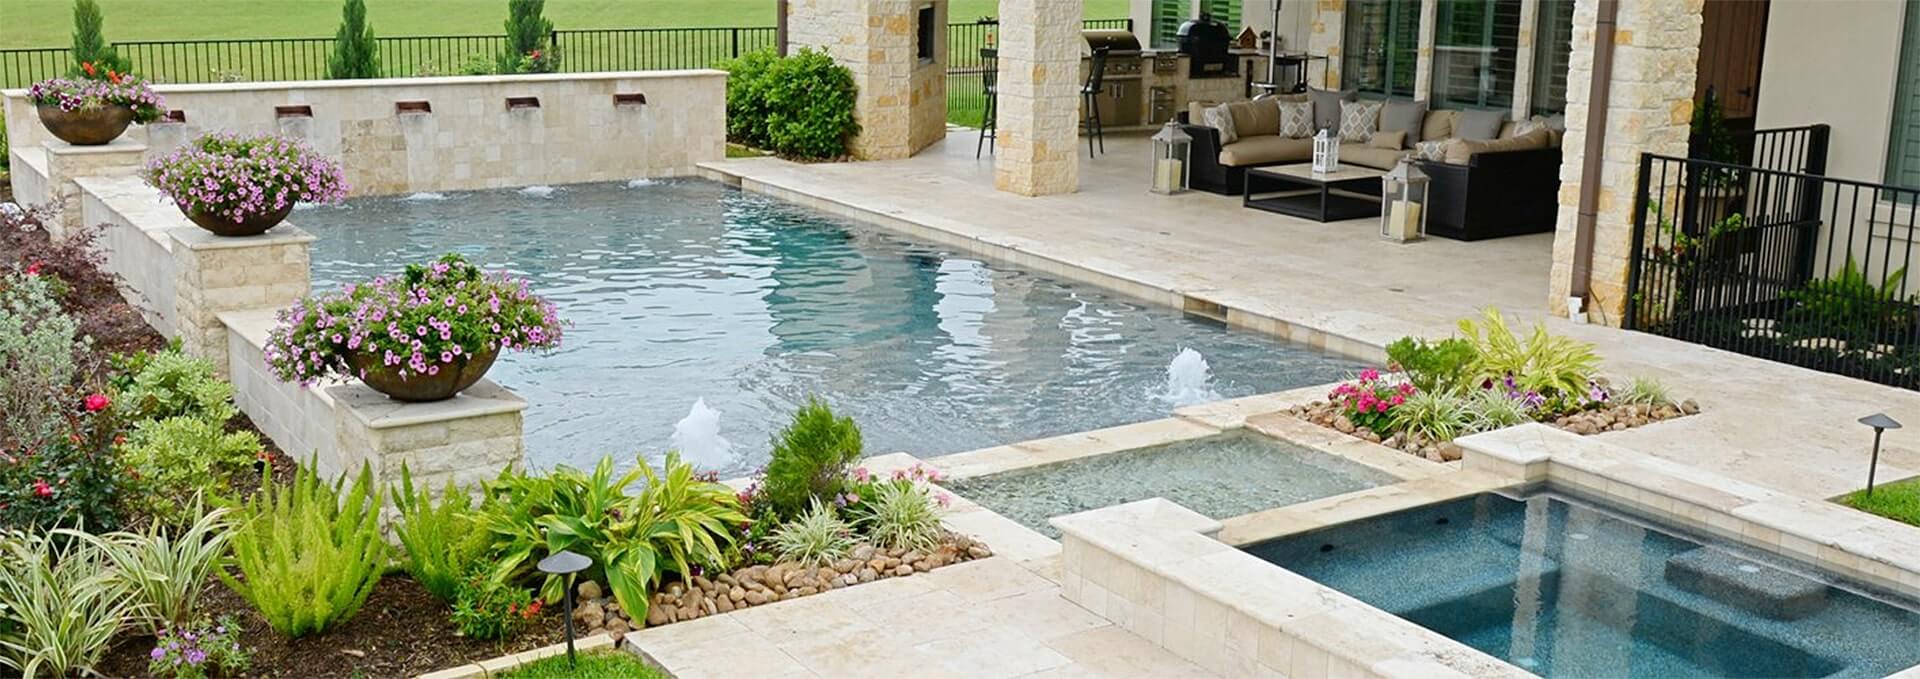 Expert Pool Design Services From pool builders in Houston